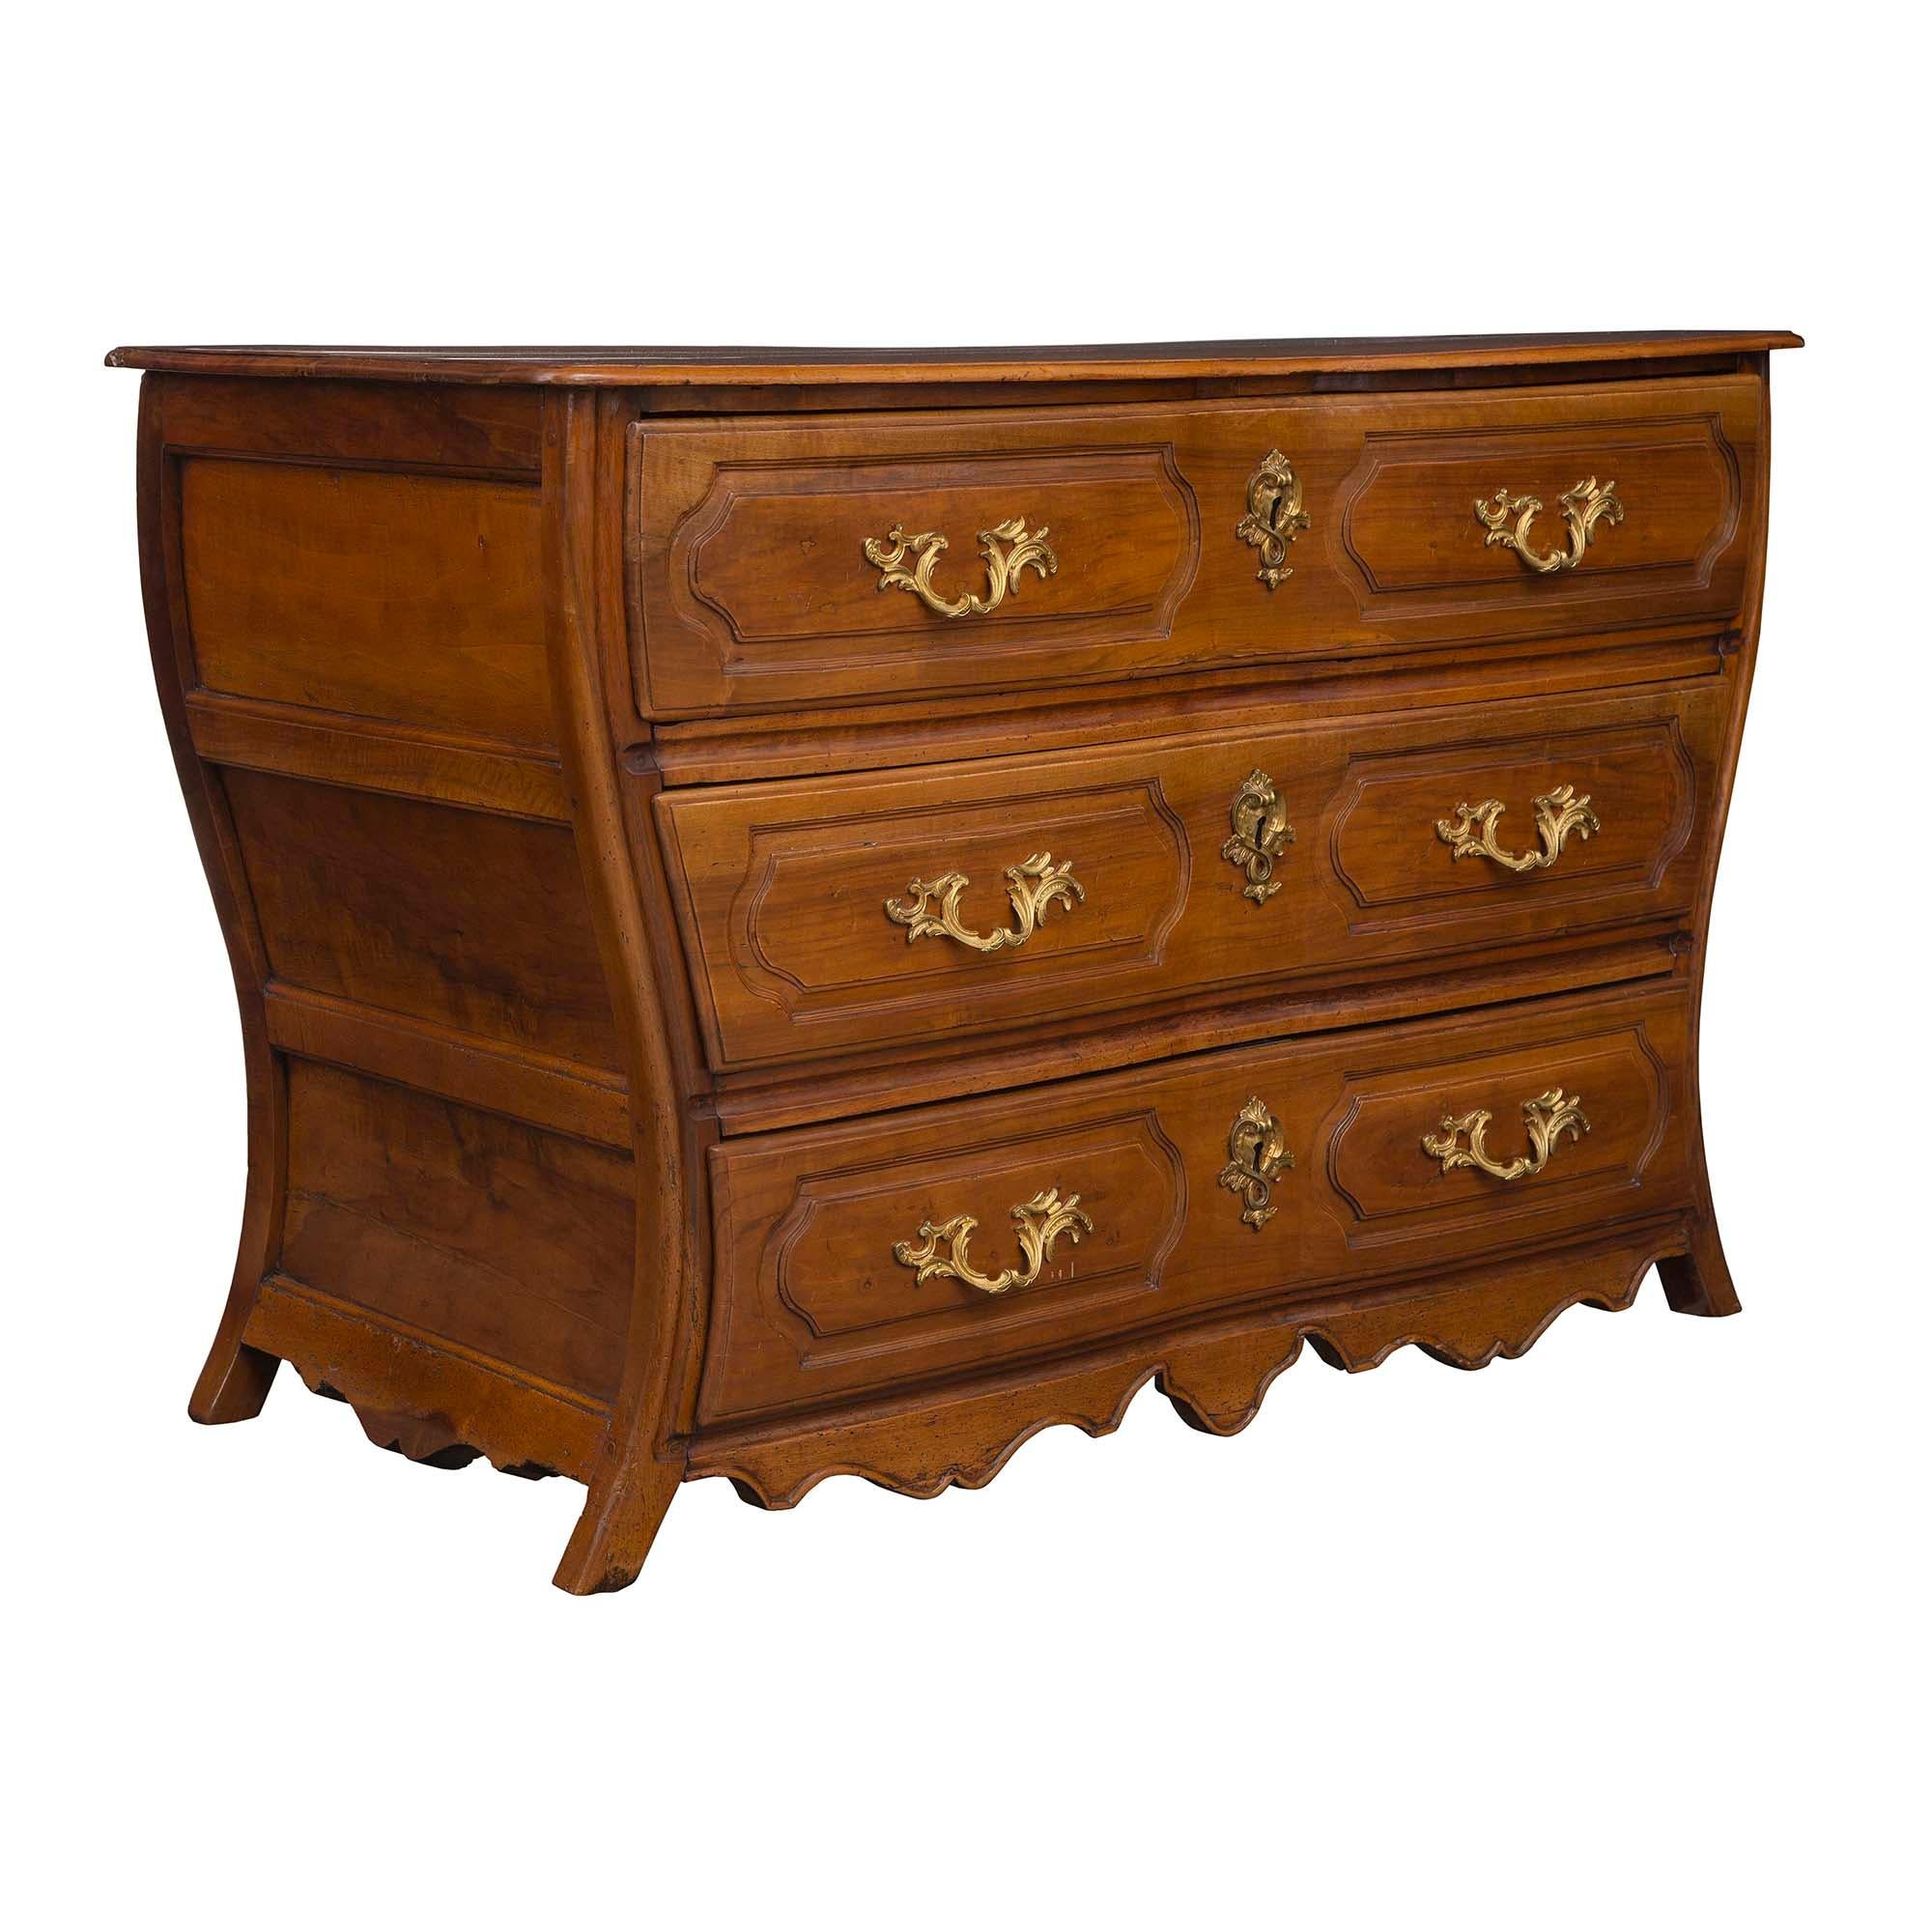 A very handsome French 18th century Louis XV period walnut and ormolu three-drawer commode. The chest is raised on slightly curved legs with a scrolled frieze and scrolled sides. The drawers have ormolu foliate handles on carved panels centered by